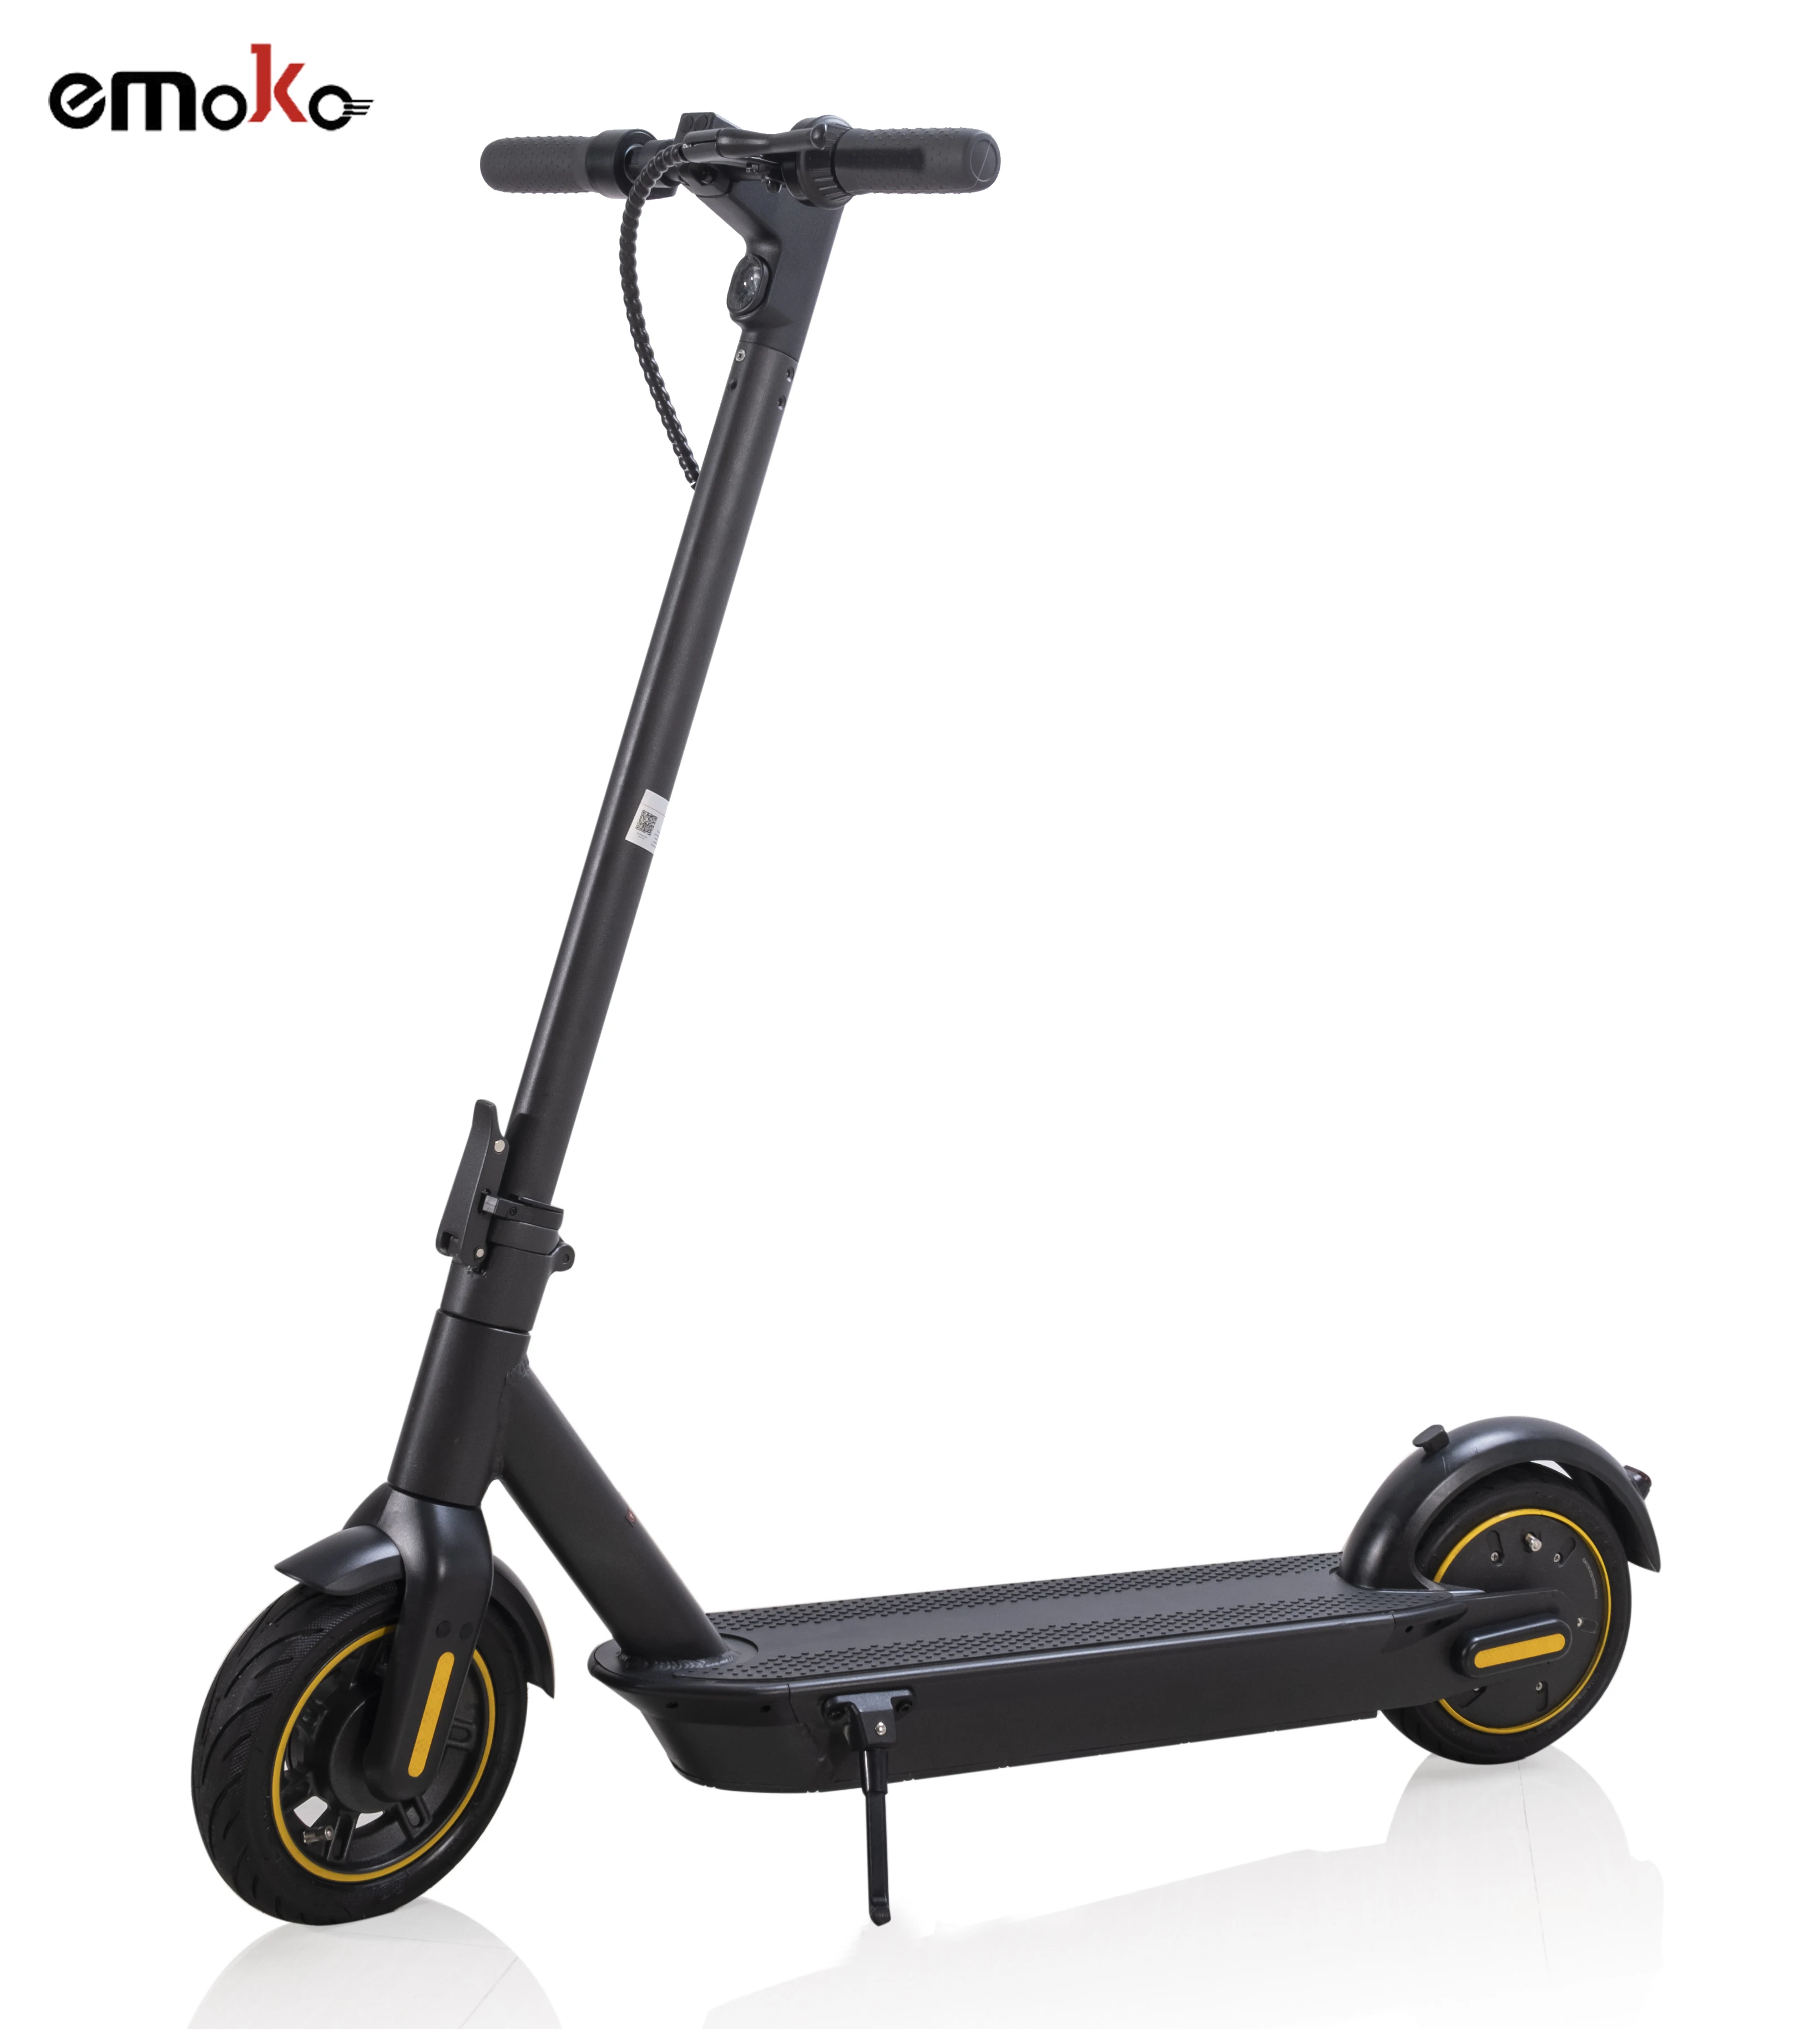 

Emoko ready to ship aluminum alloy eu warehouse e scooter electric 10'' Max portable 350w electric scooters adult app function, Black, white (customized)